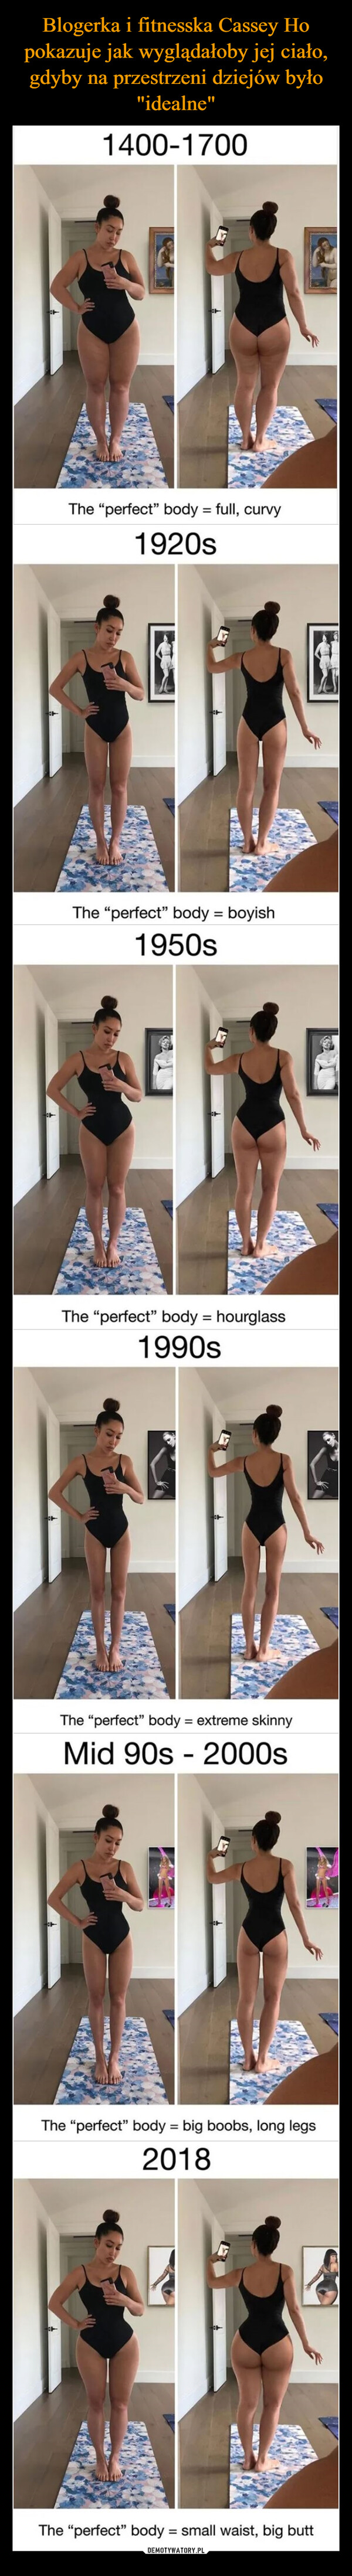  –  1400-1700**The “perfect” body = full, curvy1920s子The “perfect” body = boyish1950s20日月 E子The “perfect” body = hourglass1990s大家The “perfect” body = extreme skinnyMid 90s - 2000sThe “perfect” body = big boobs, long legs2018情今The “perfect” body = small waist, big butt